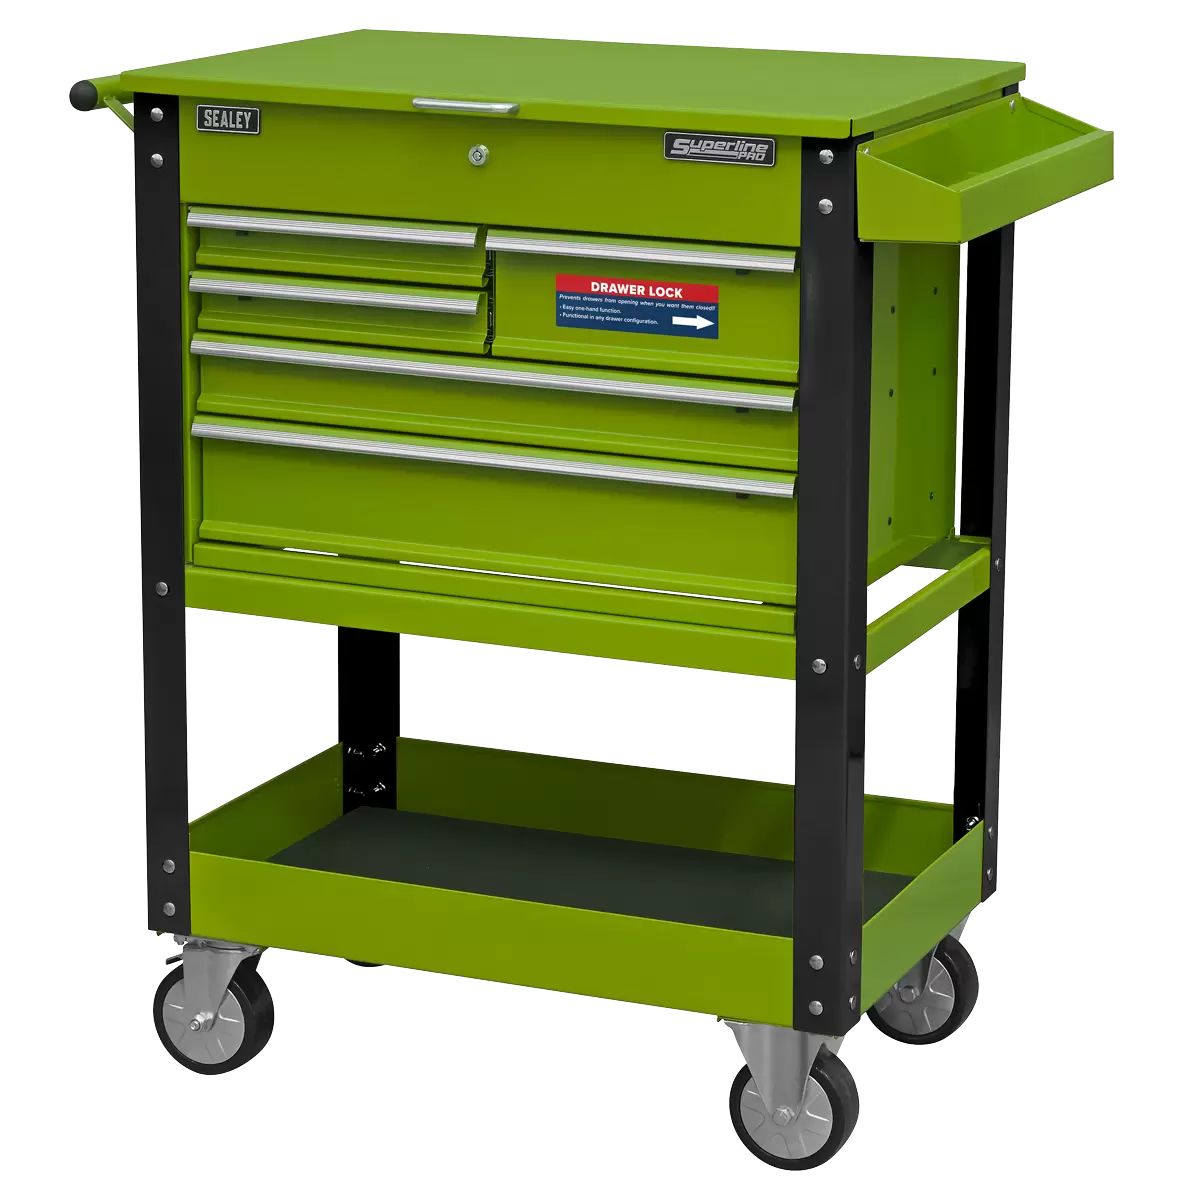 Sealey AP890MHV Heavy-Duty 5 Drawers and Lockable Top Mobile Trolley Green